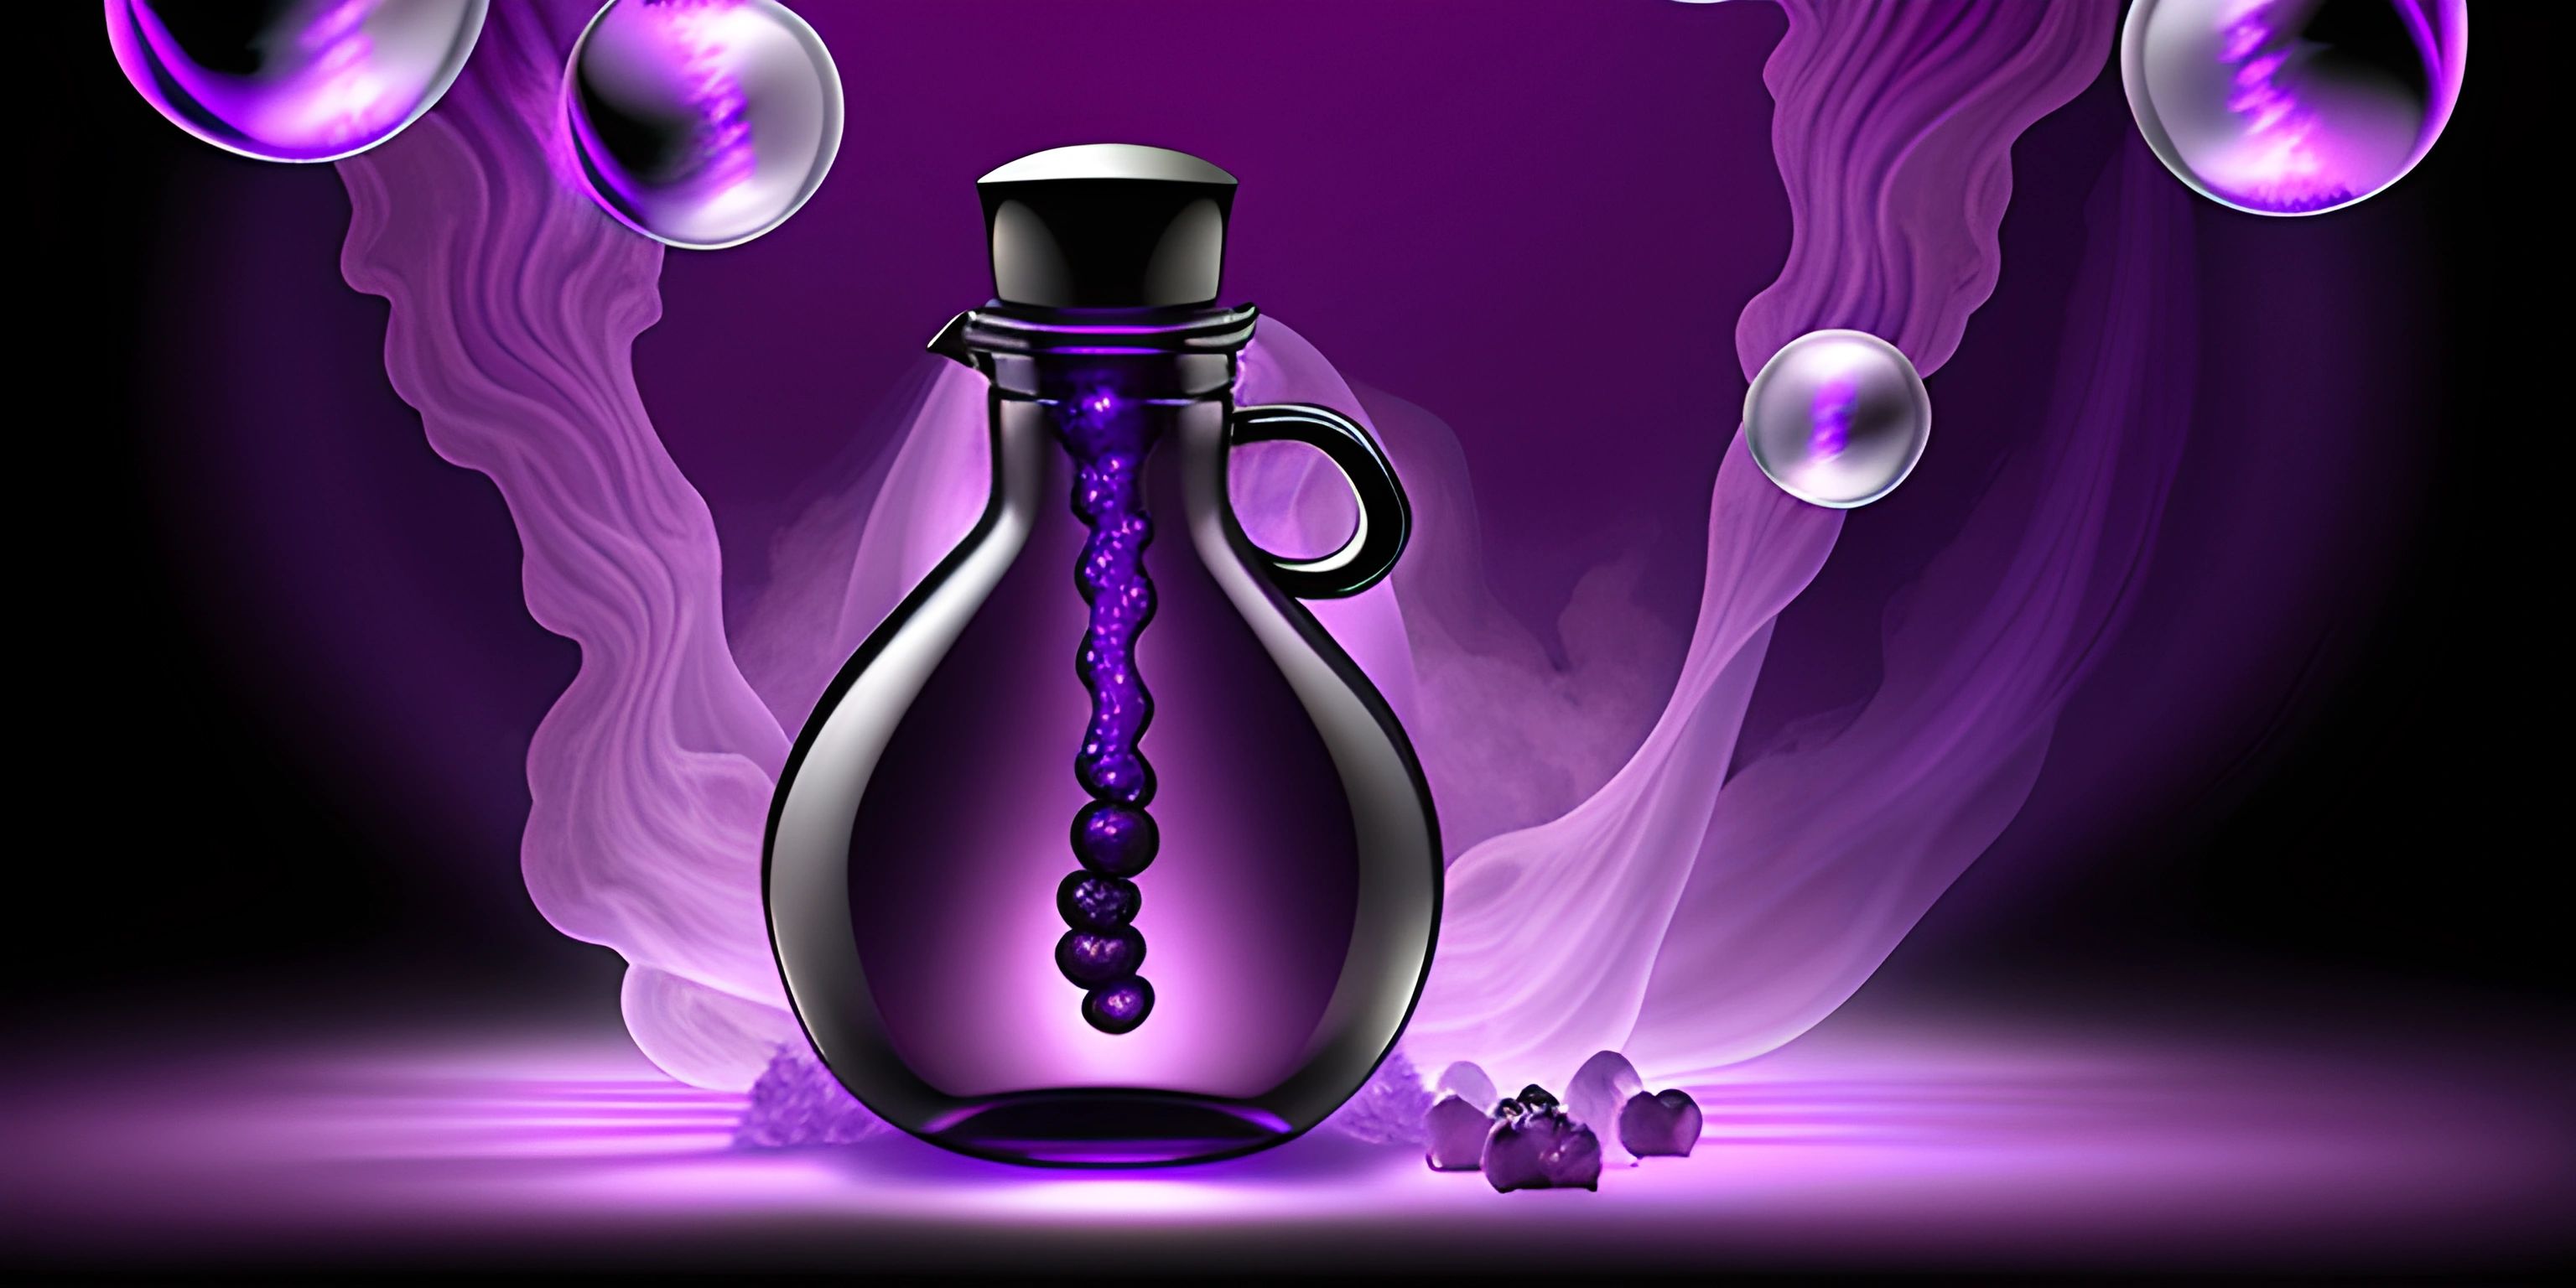 a bottle with liquid pouring into it on a dark background with smoke pouring out from the bottles